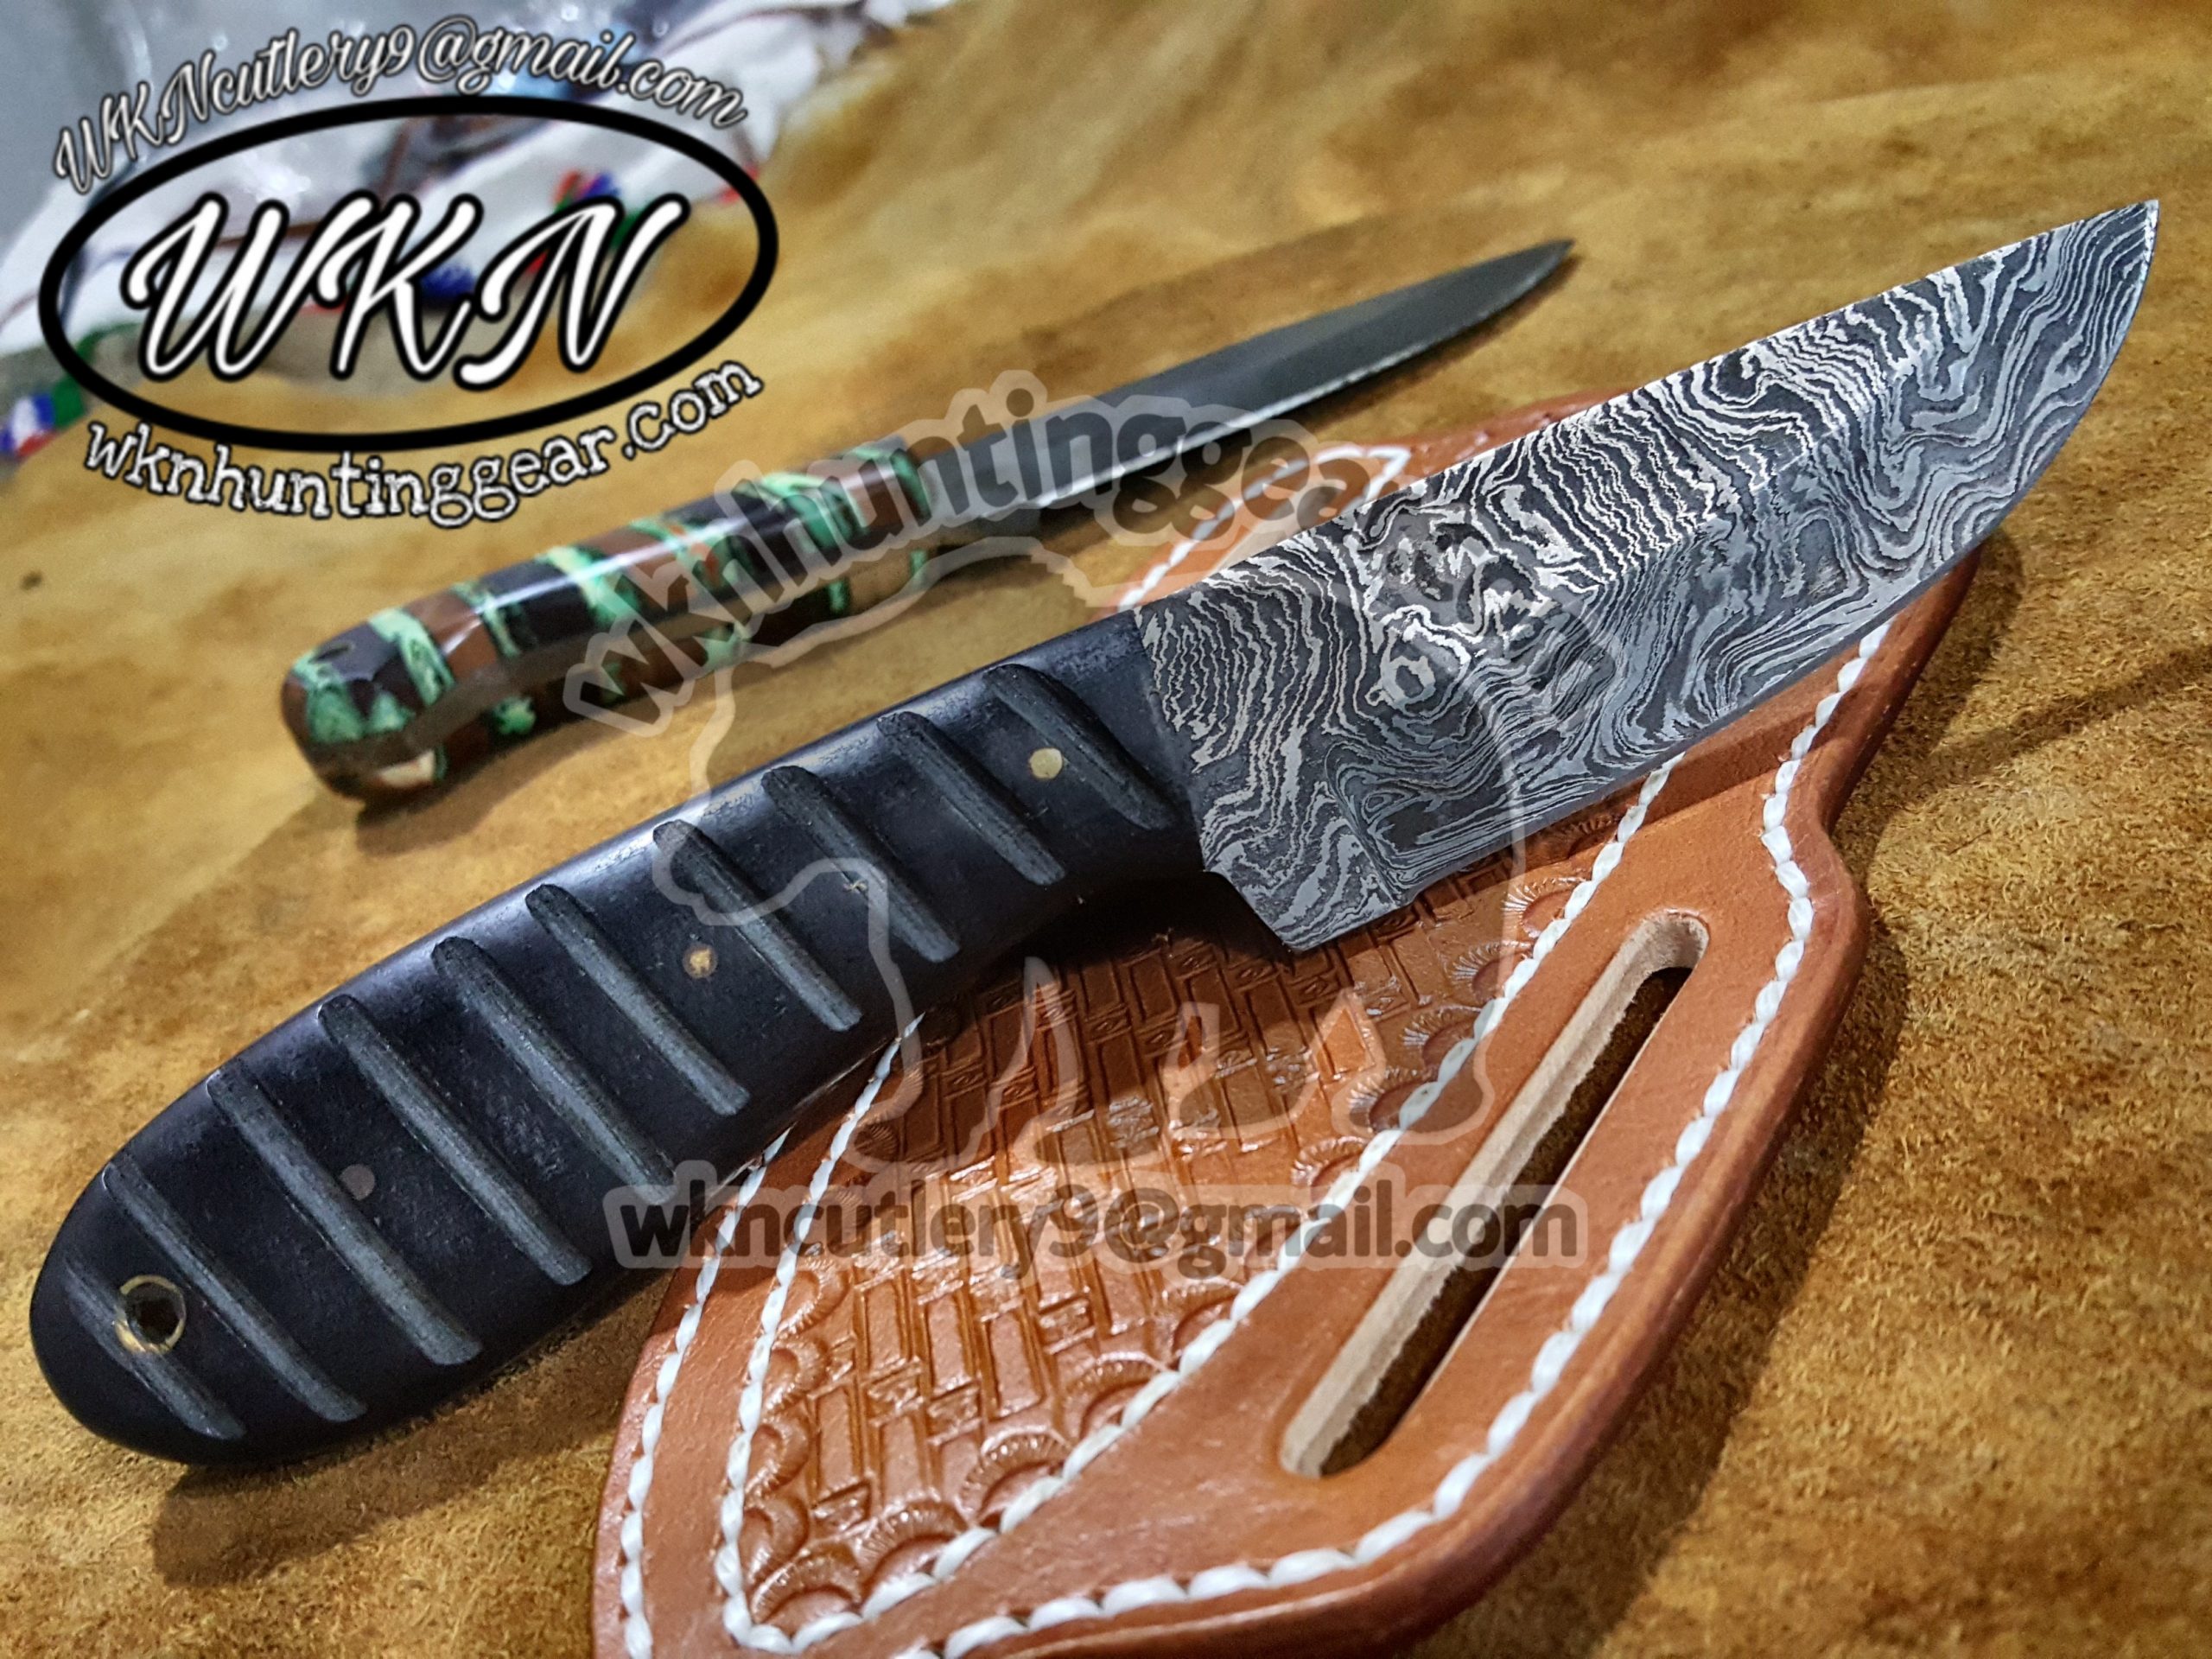 Custom Made Damascus Steel Cowboy and Skinner knives set - WKN